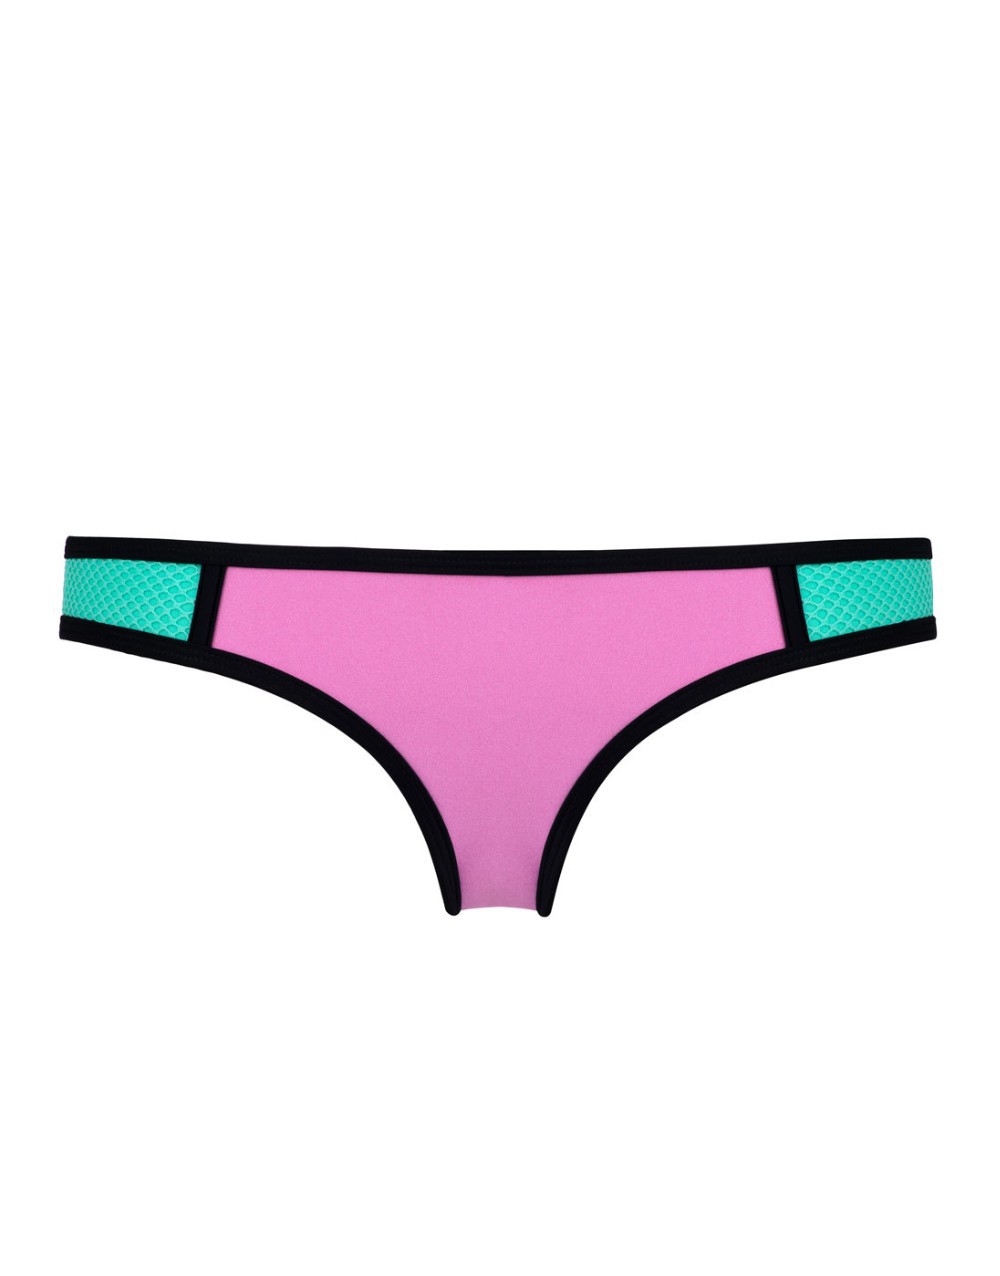 4.-TRIANGL-POPPY-PARADISE-BOTTOMS-FRONT